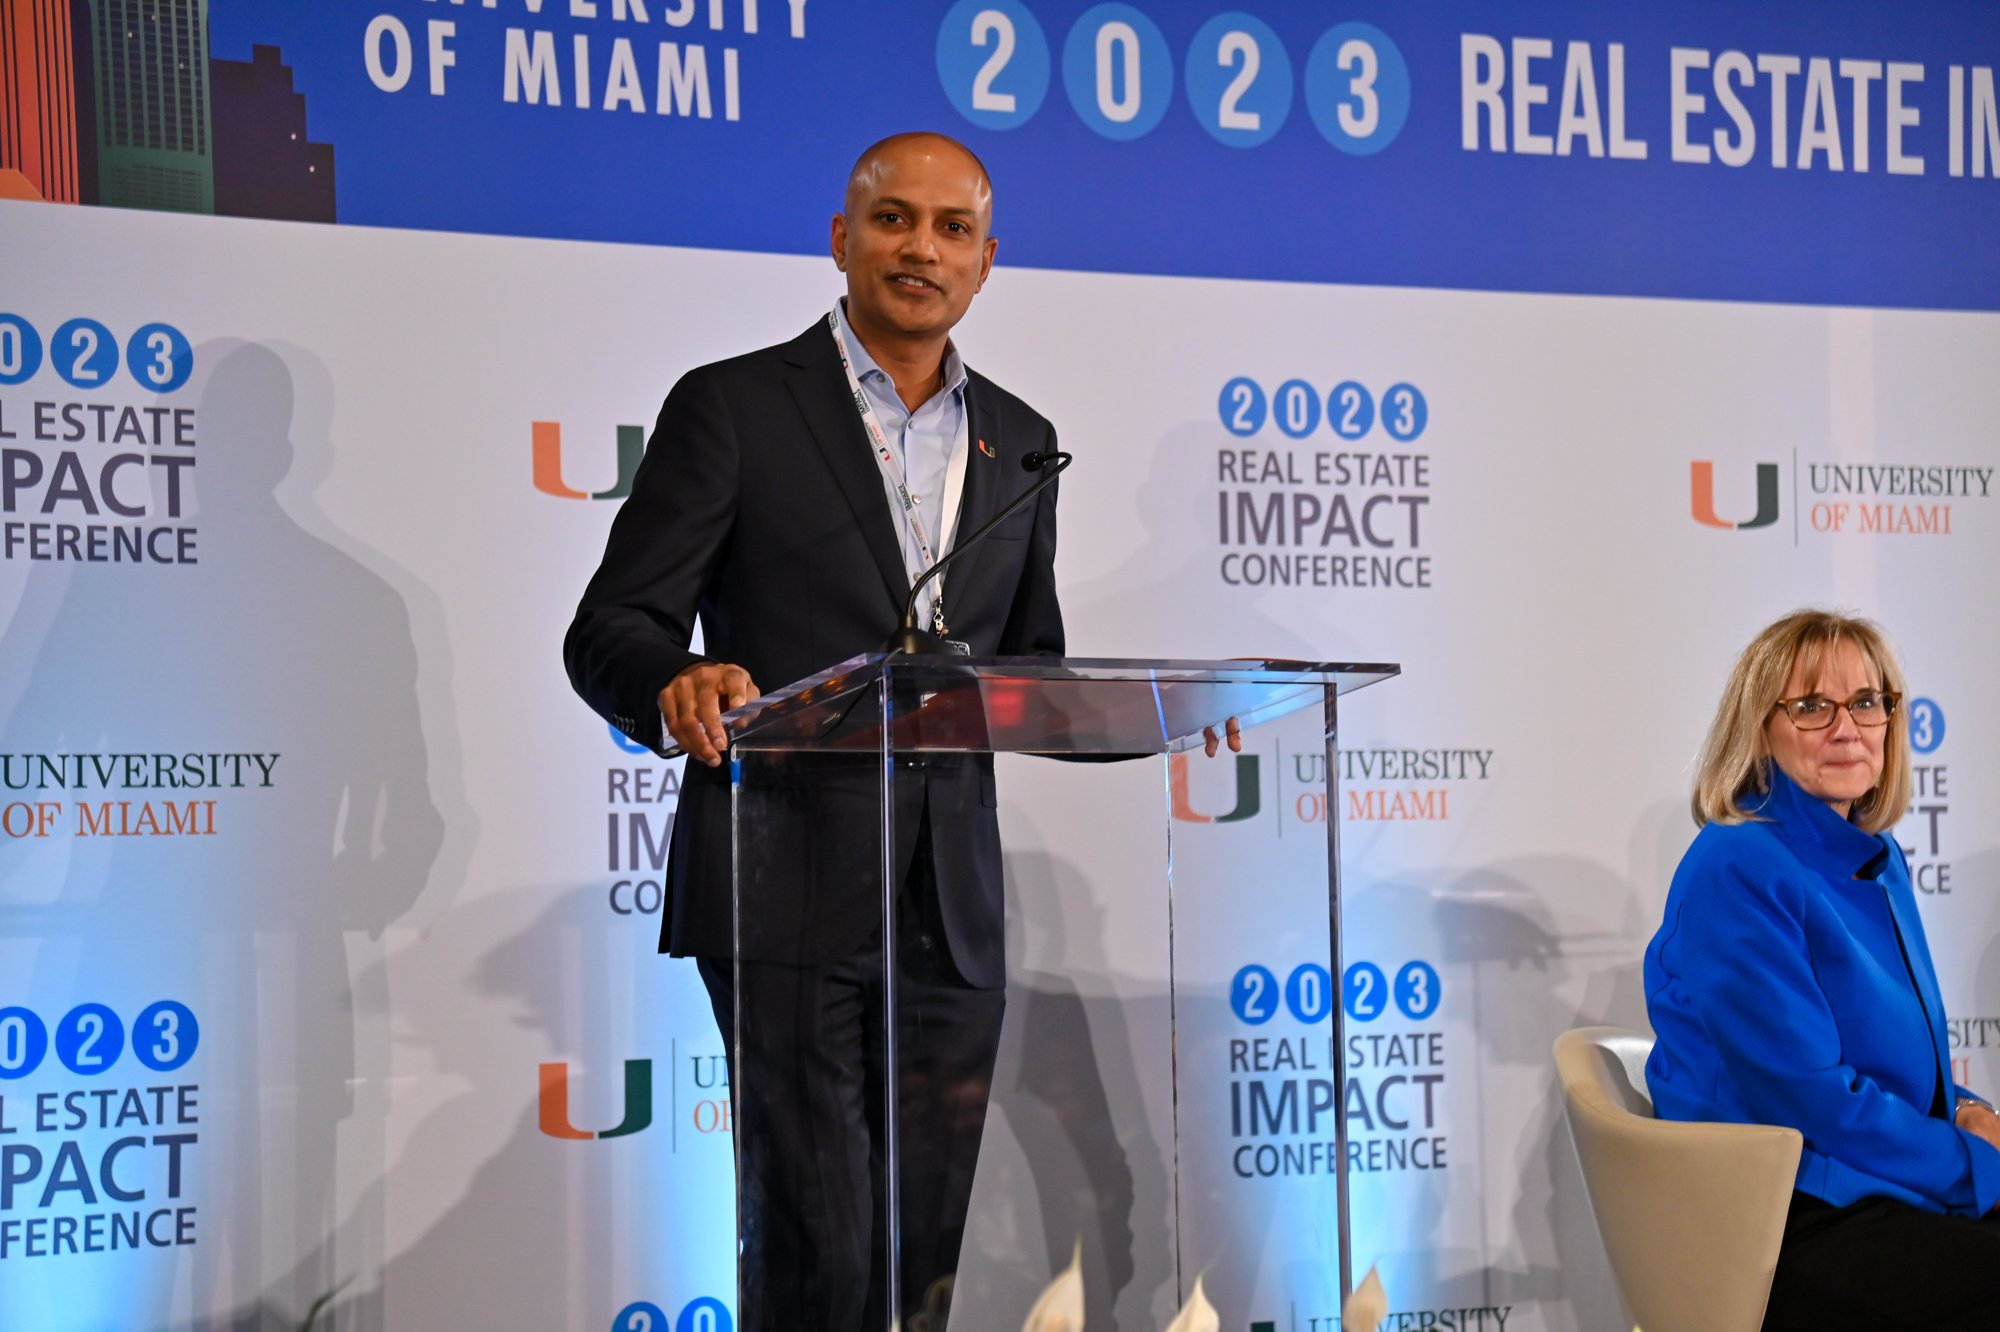 University of Miami Real Estate Impact Conference 2023 The Largest Edition Yet As Real Estate Leaders Discuss The State of Miami Real Estate 281.jpg